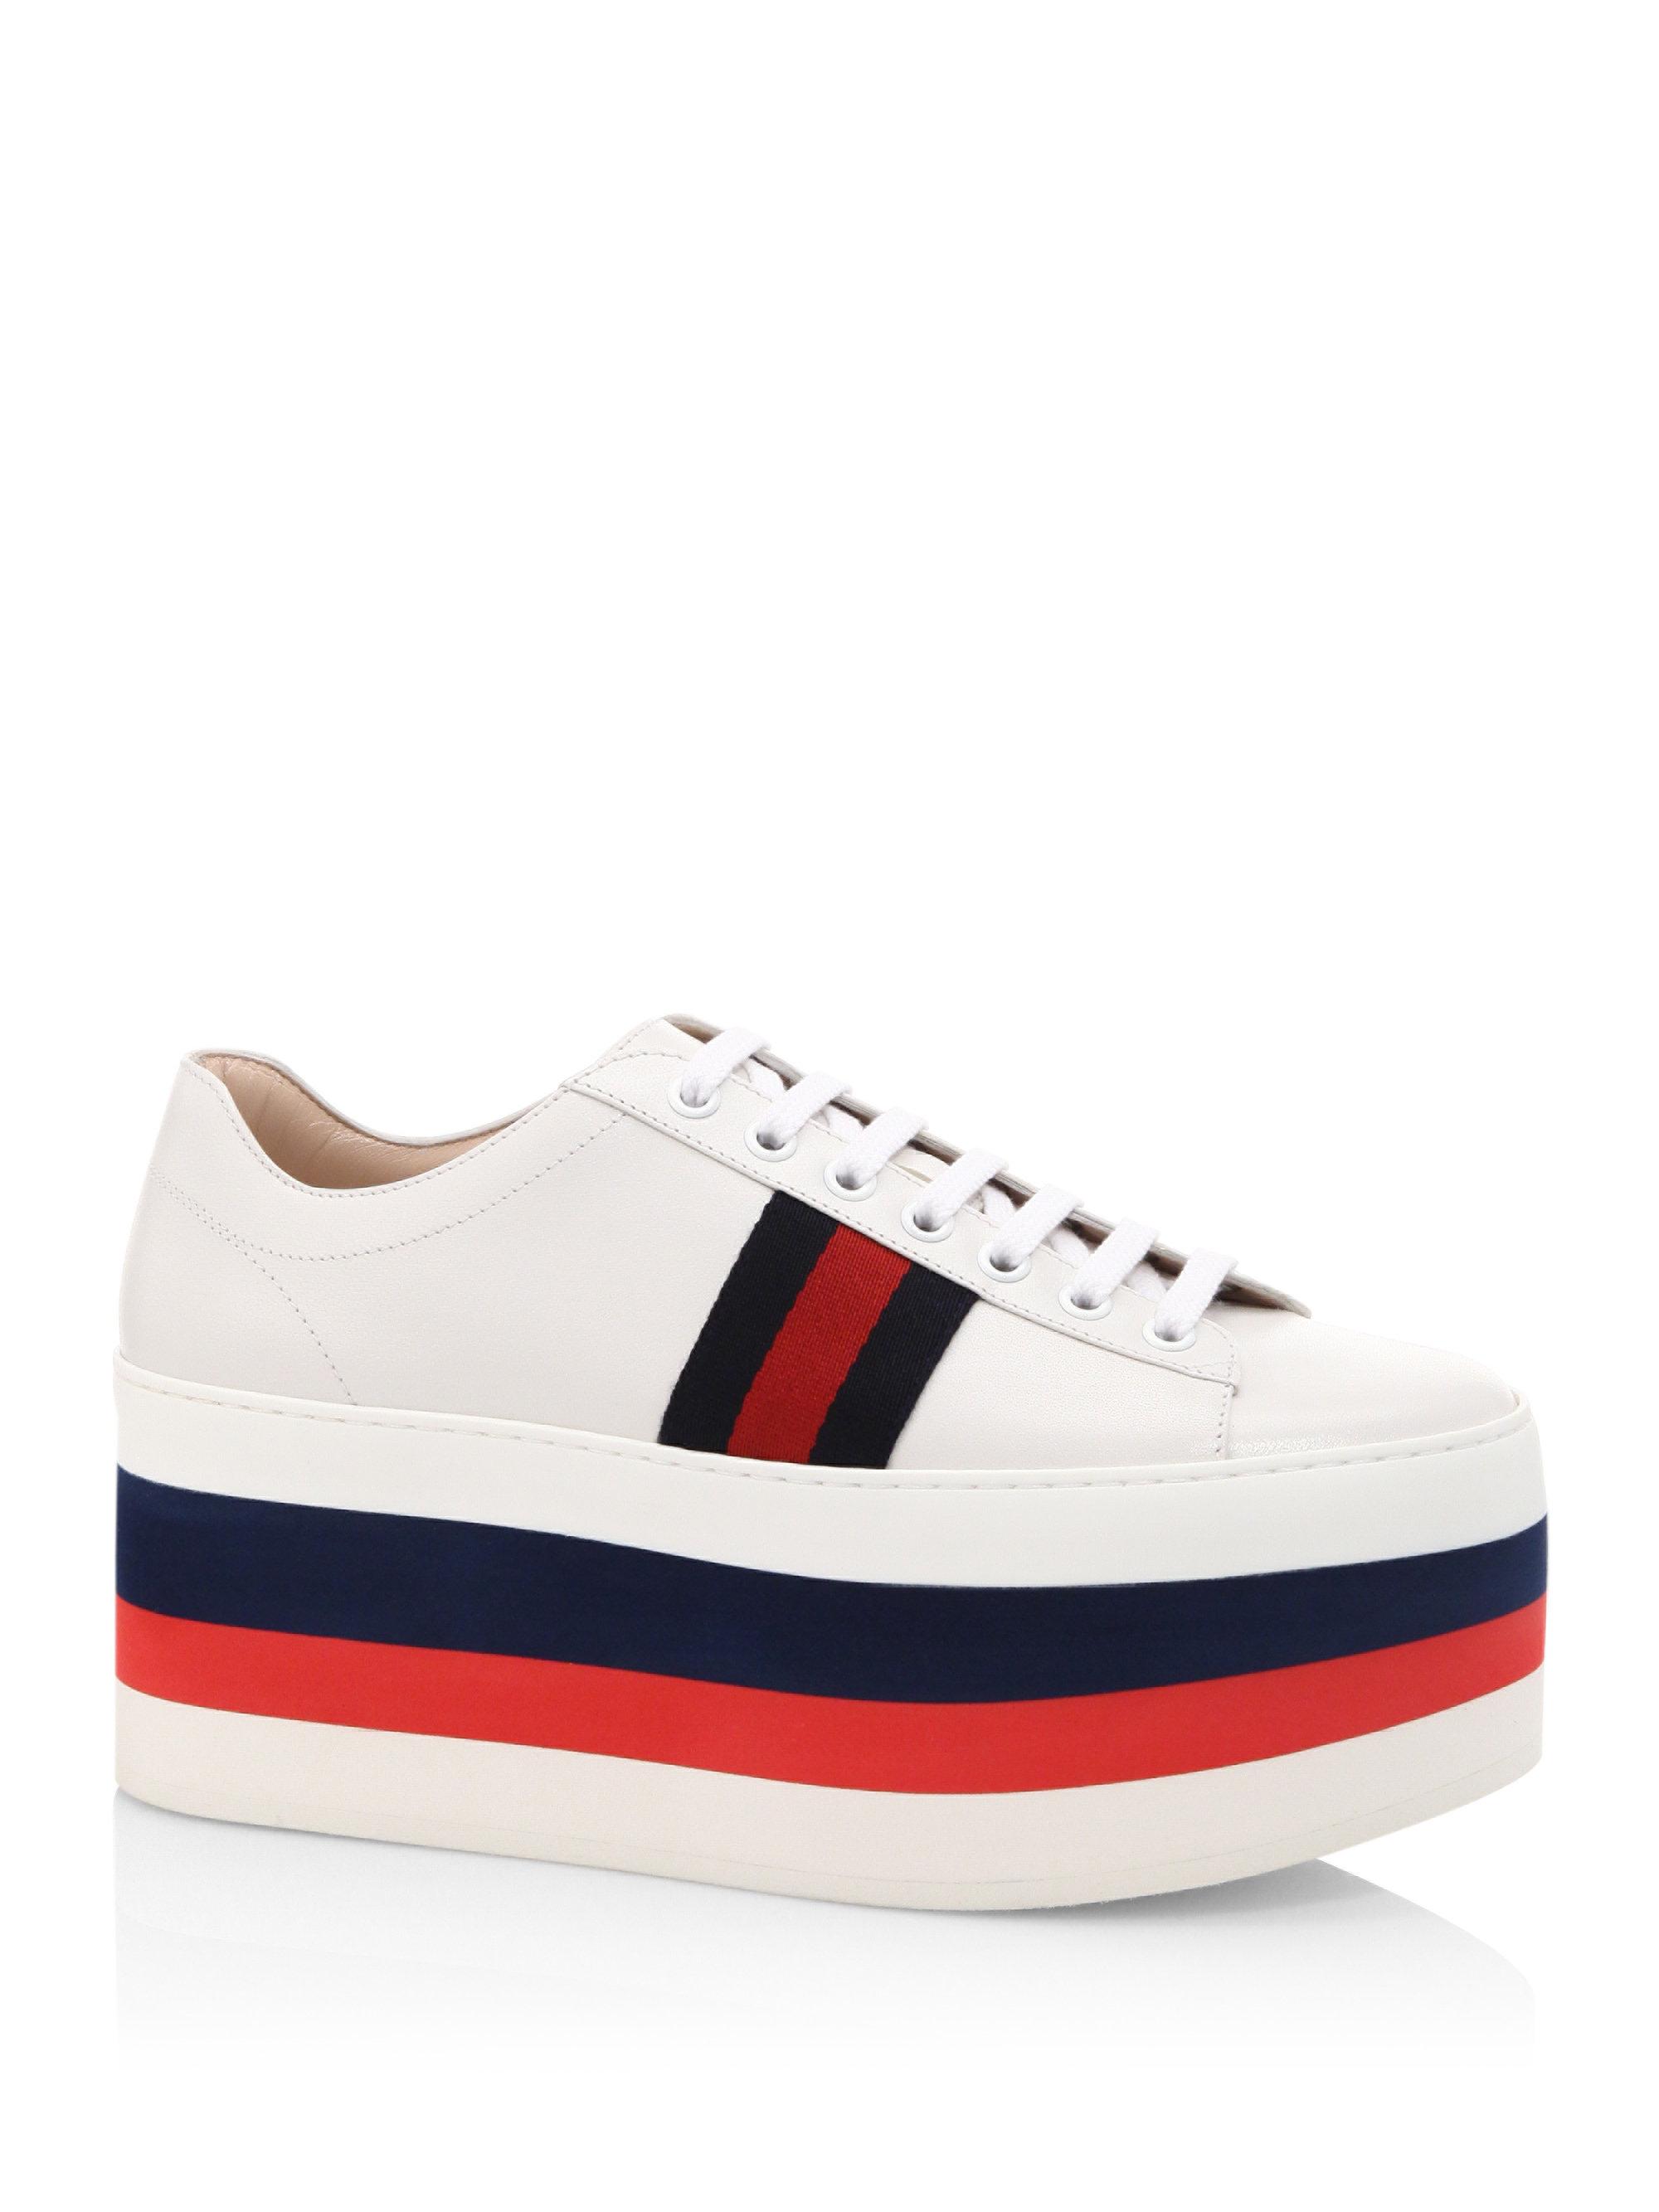 Lyst - Gucci Peggy Leather Rainbow Platform Sneakers in White